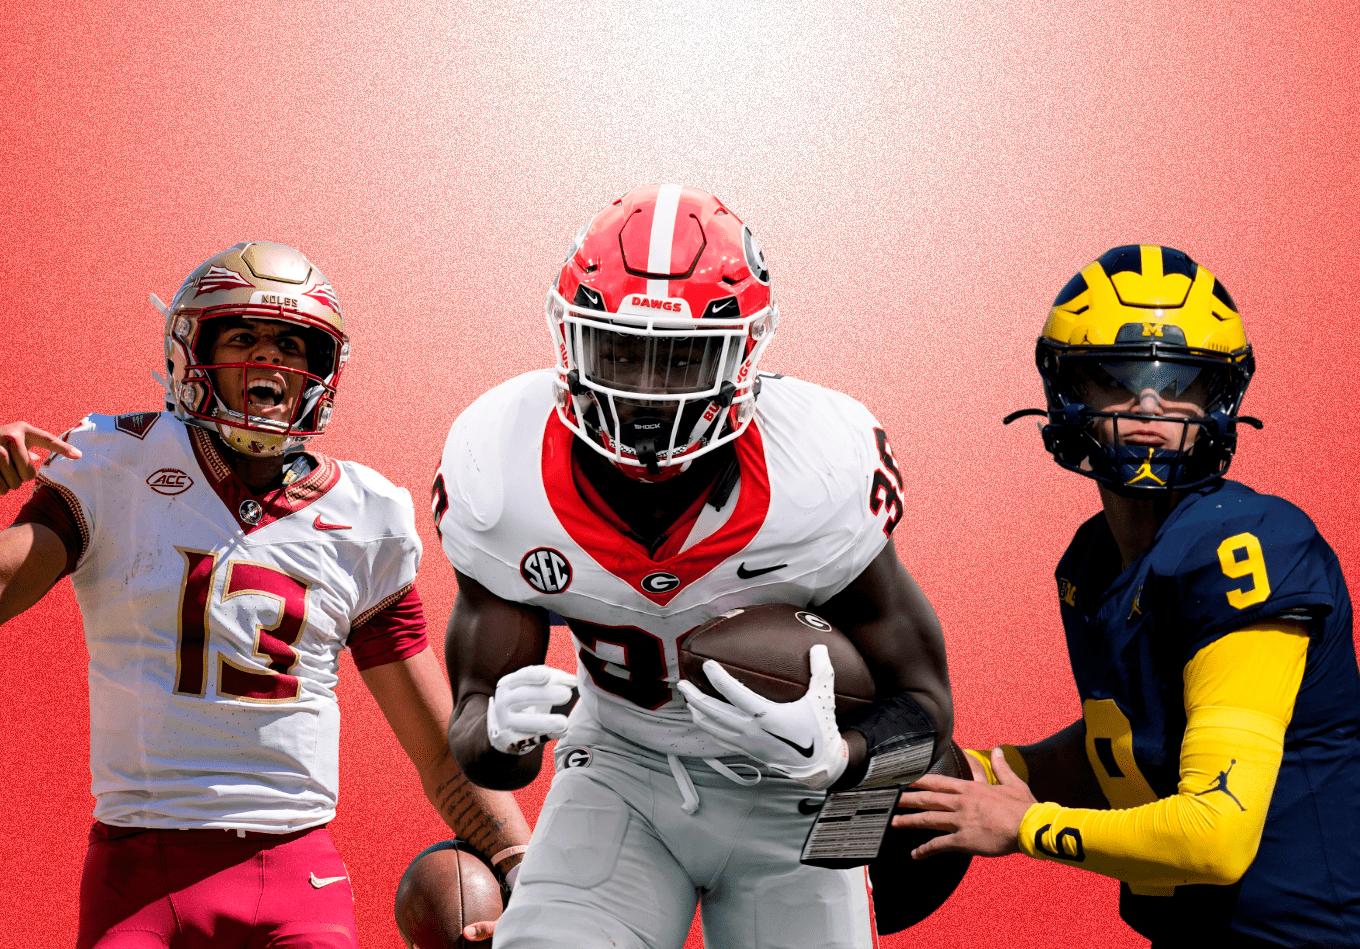 10 quick things to know ahead of Saturday's college football slate